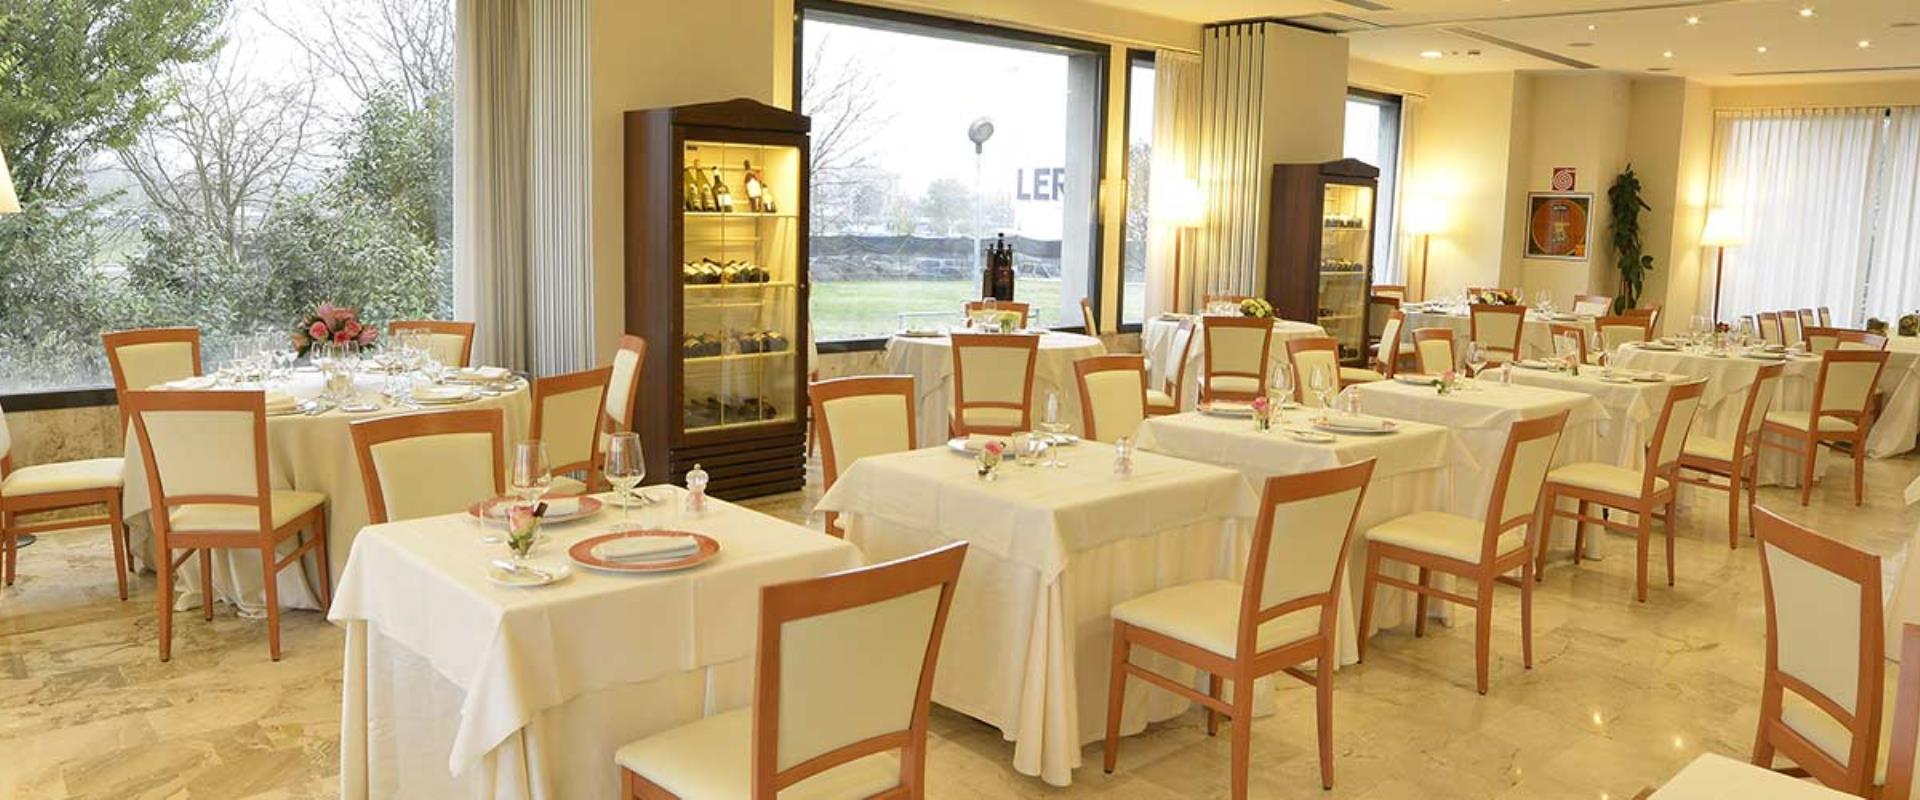  Looking for a hotel for your stay in Piacenza (PC)? Book/reserve at the Best Western Park Hotel